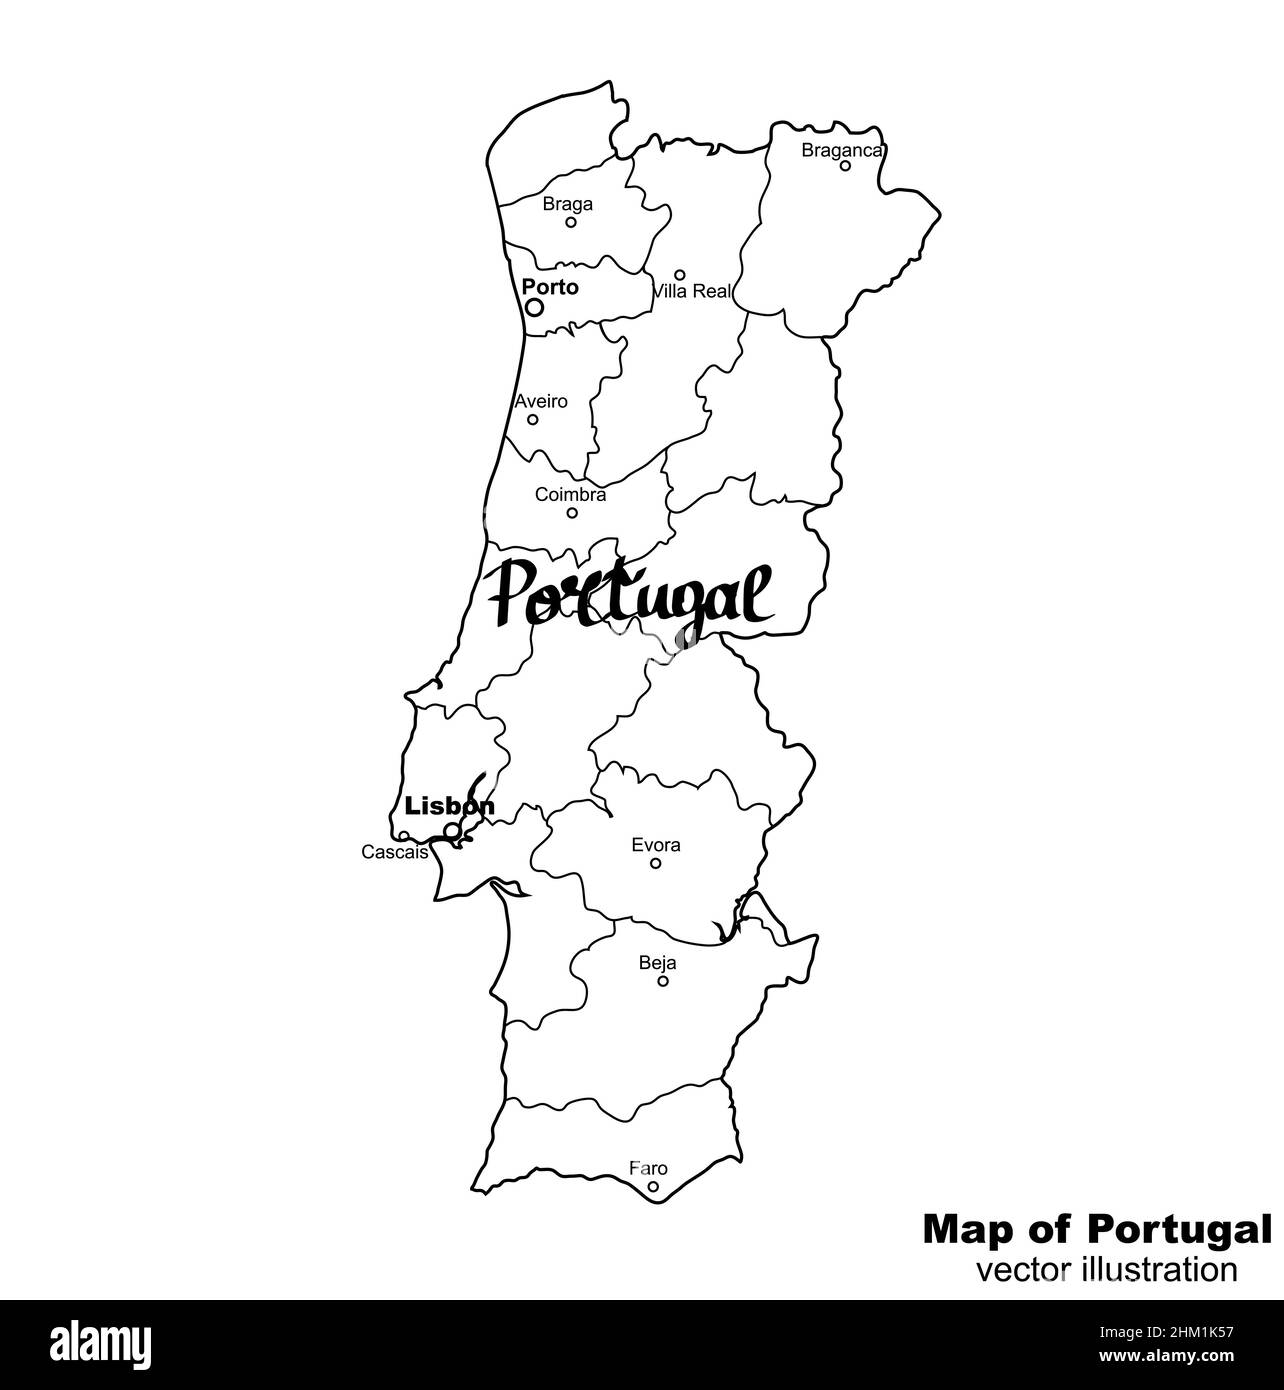 Map of Portugal. Bright illustration with map. Illustration with gray background. Portugal map with portuguese major cities. Illustration. Stock Photo